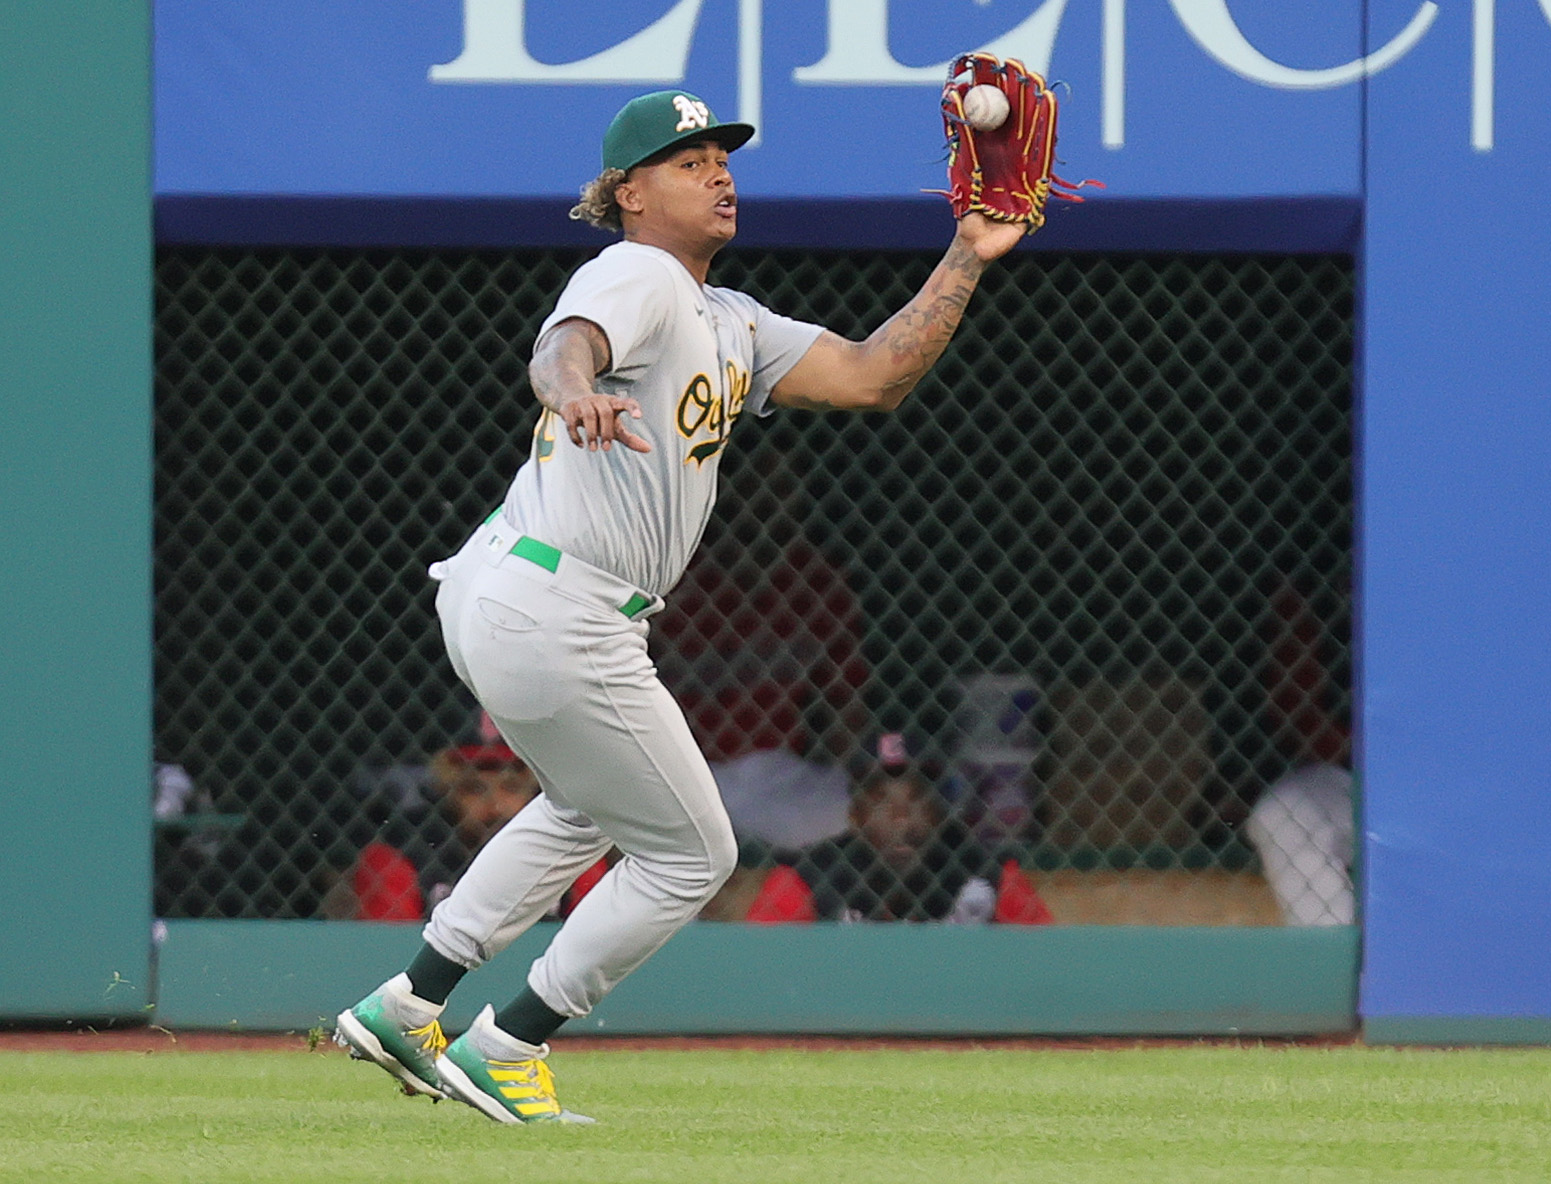 Phillies get outfielder Pache from A's for minor leaguer